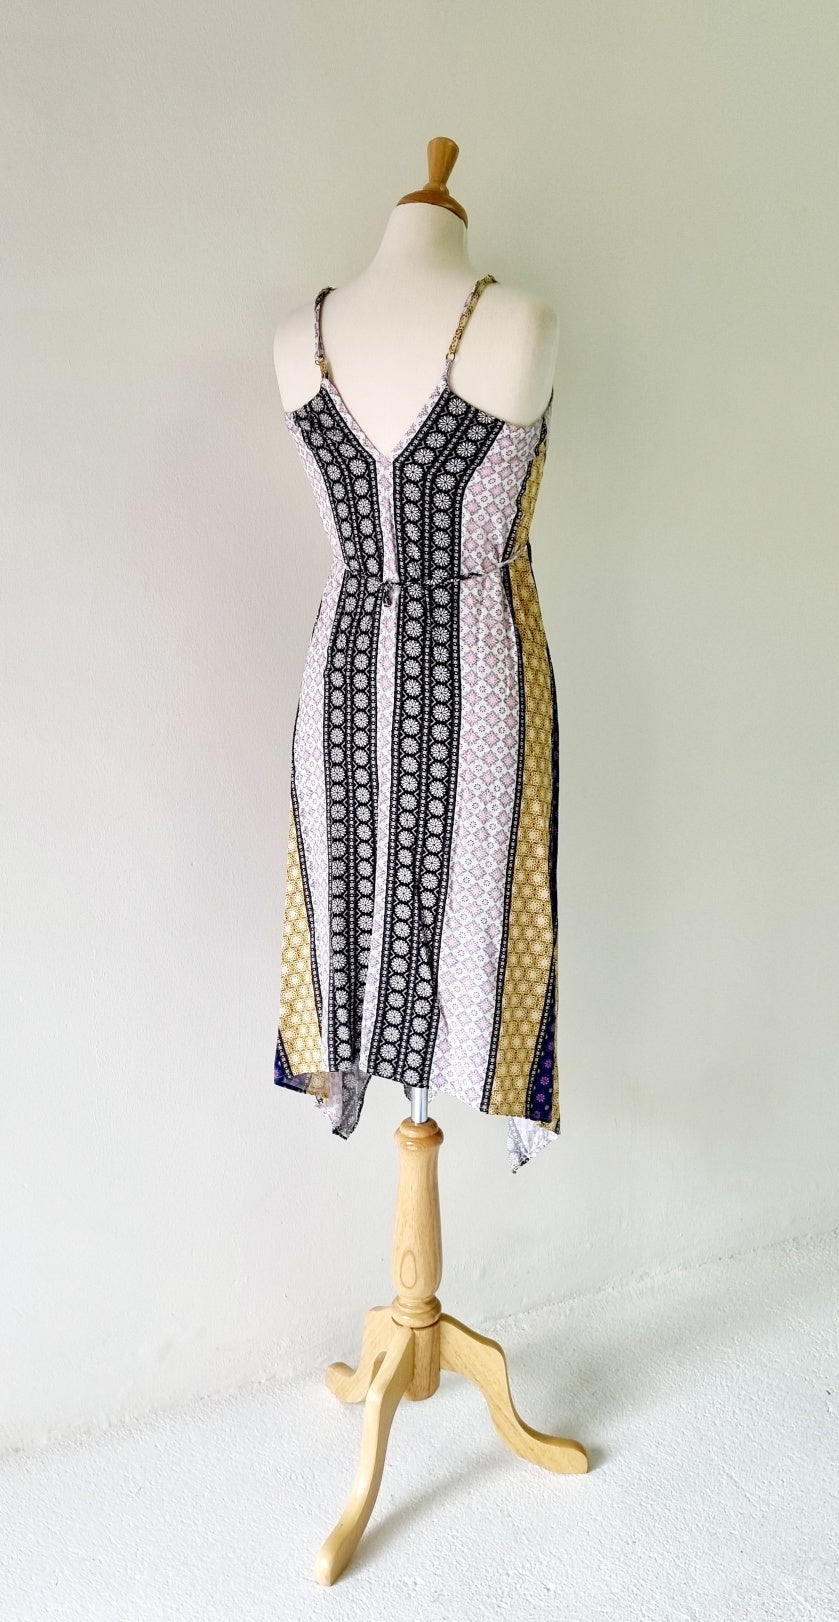 Maxed SA - White Linear Patterned Scarf Dress